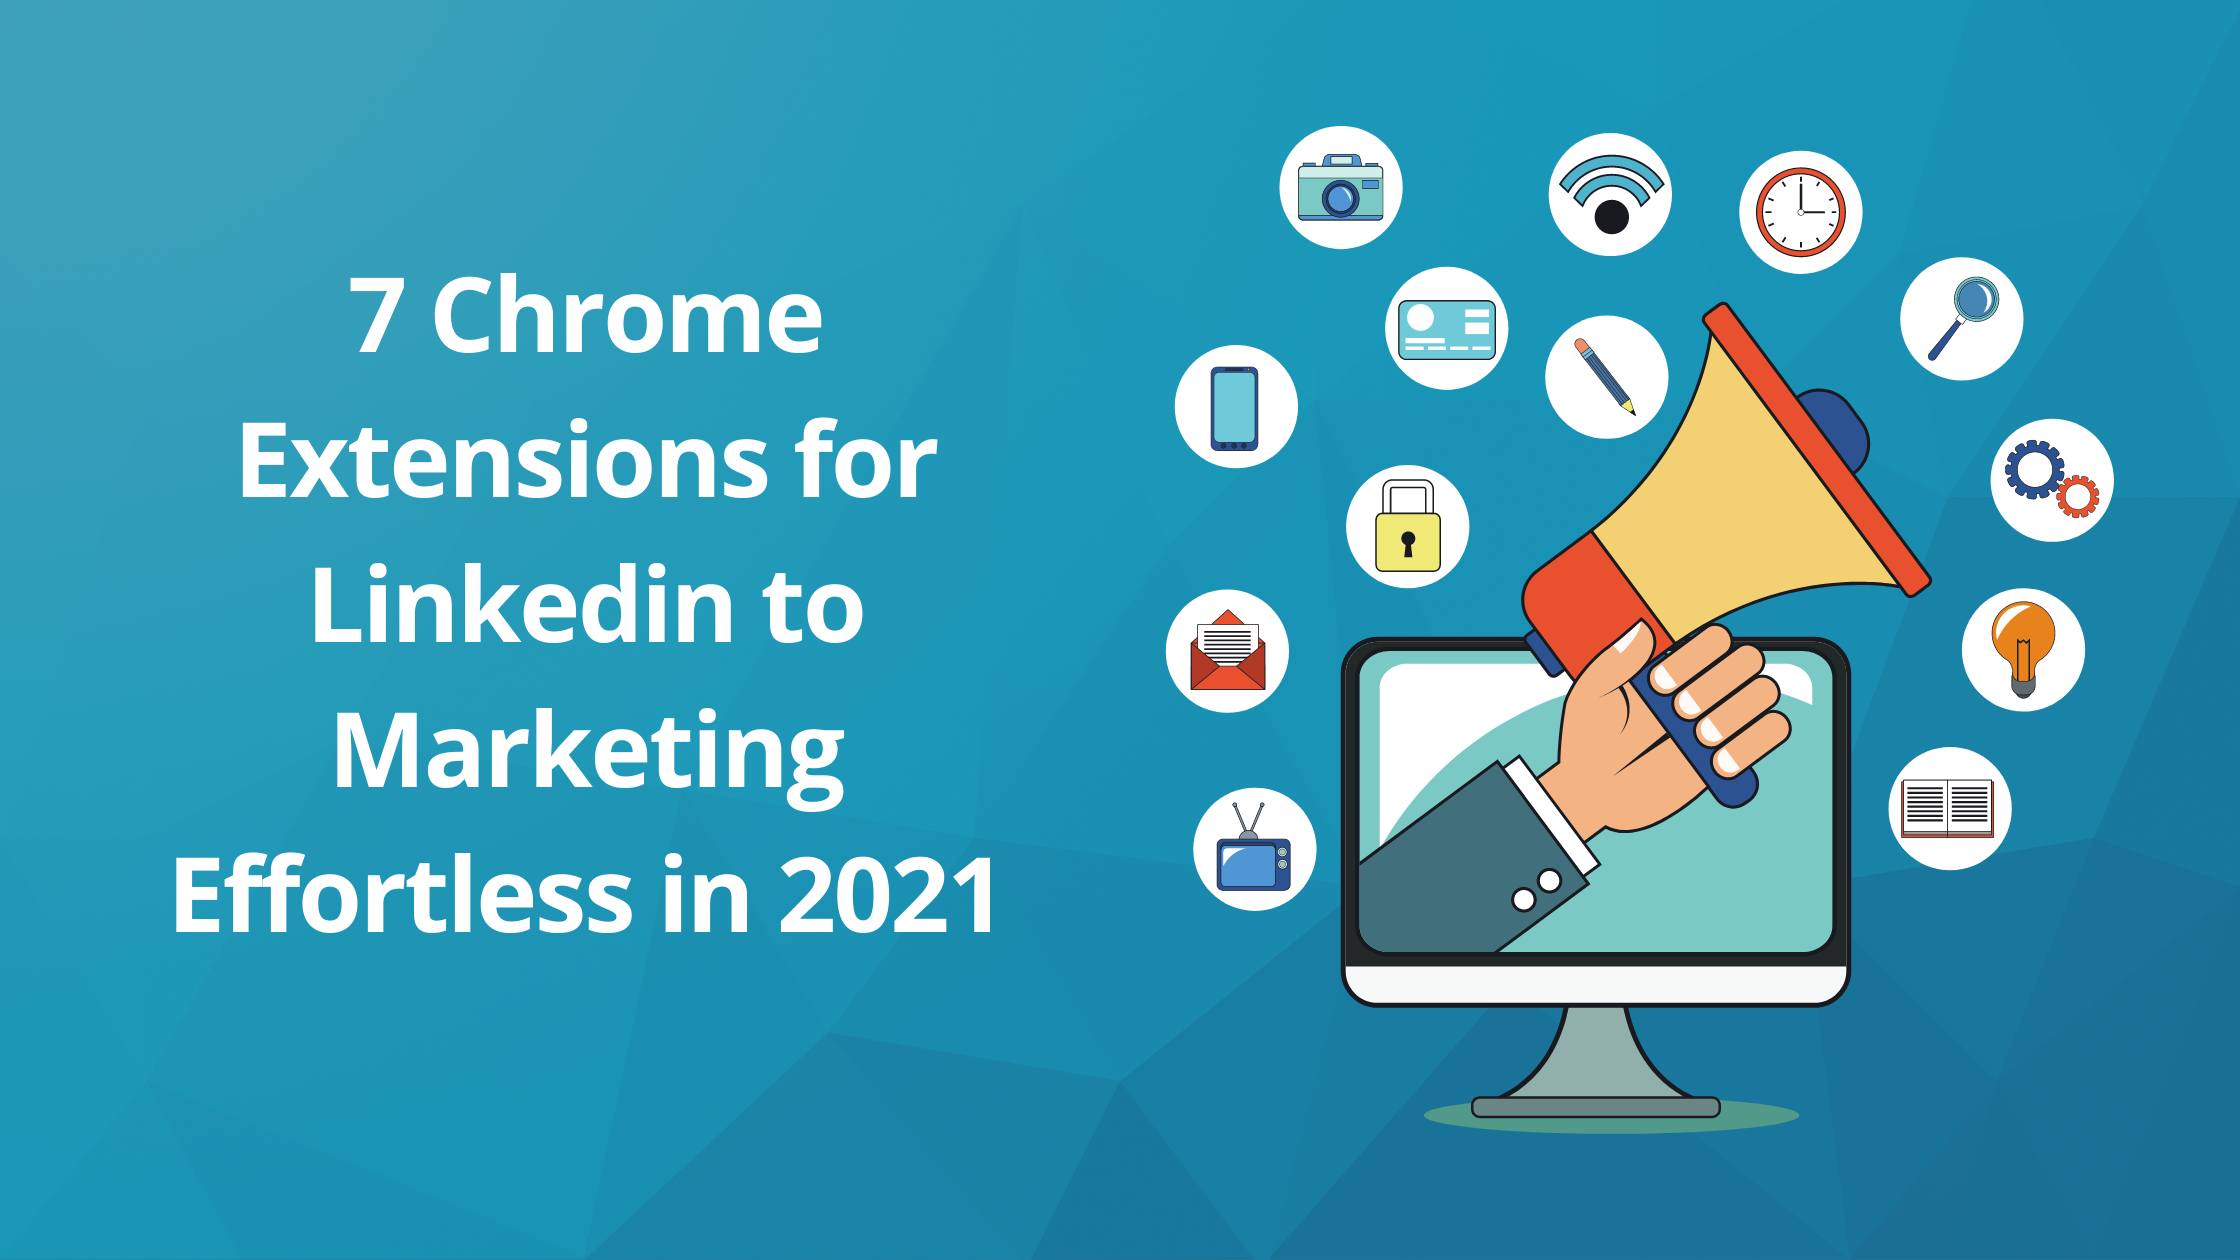 7 Chrome Extensions for Linkedin to Marketing Effortless in 2021